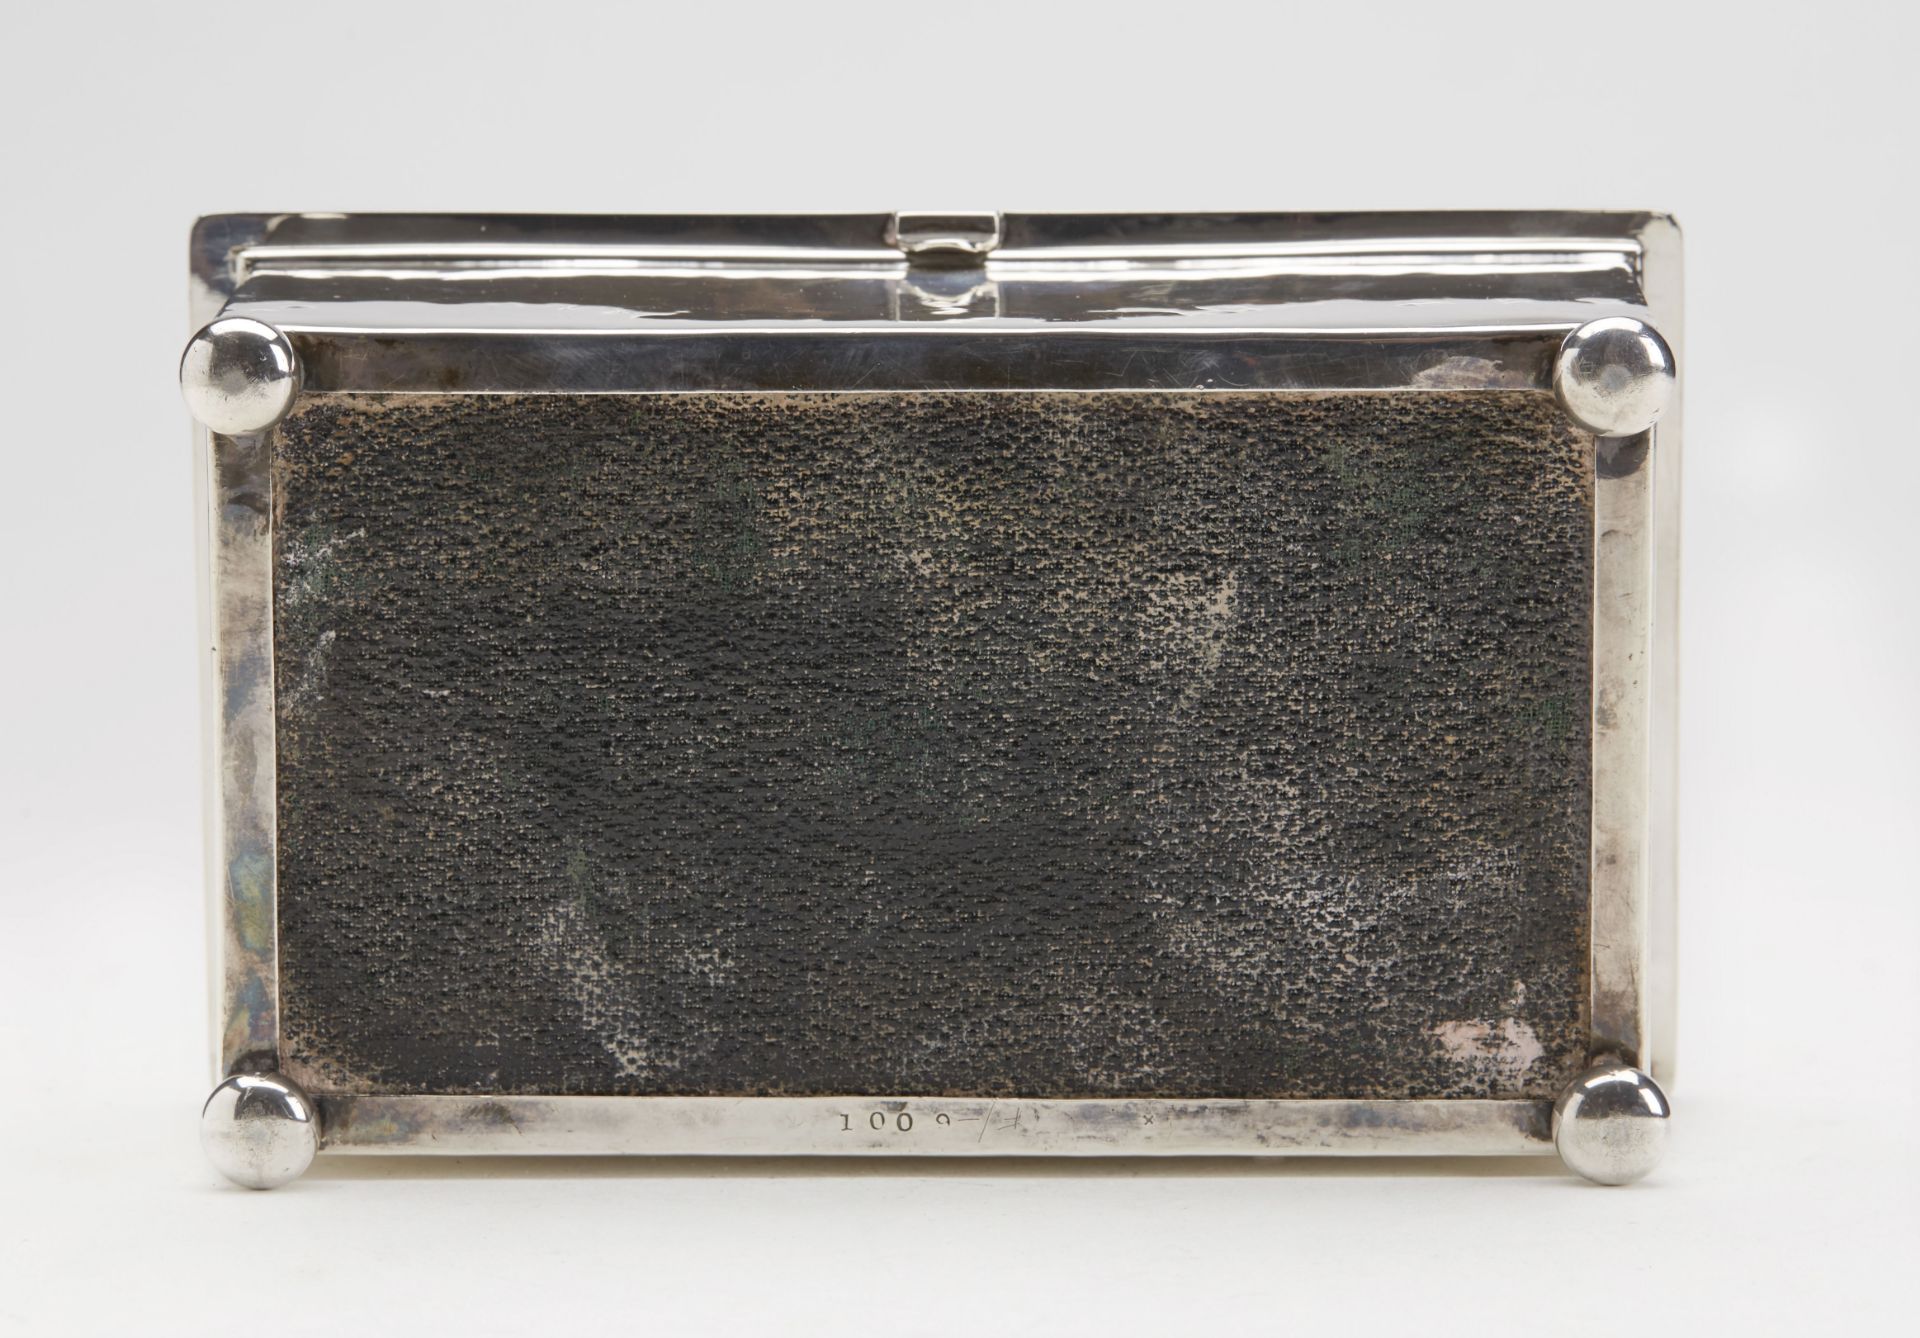 Arts & Crafts Silver Cigarette Box By Ae Jones 1939 - Image 8 of 9